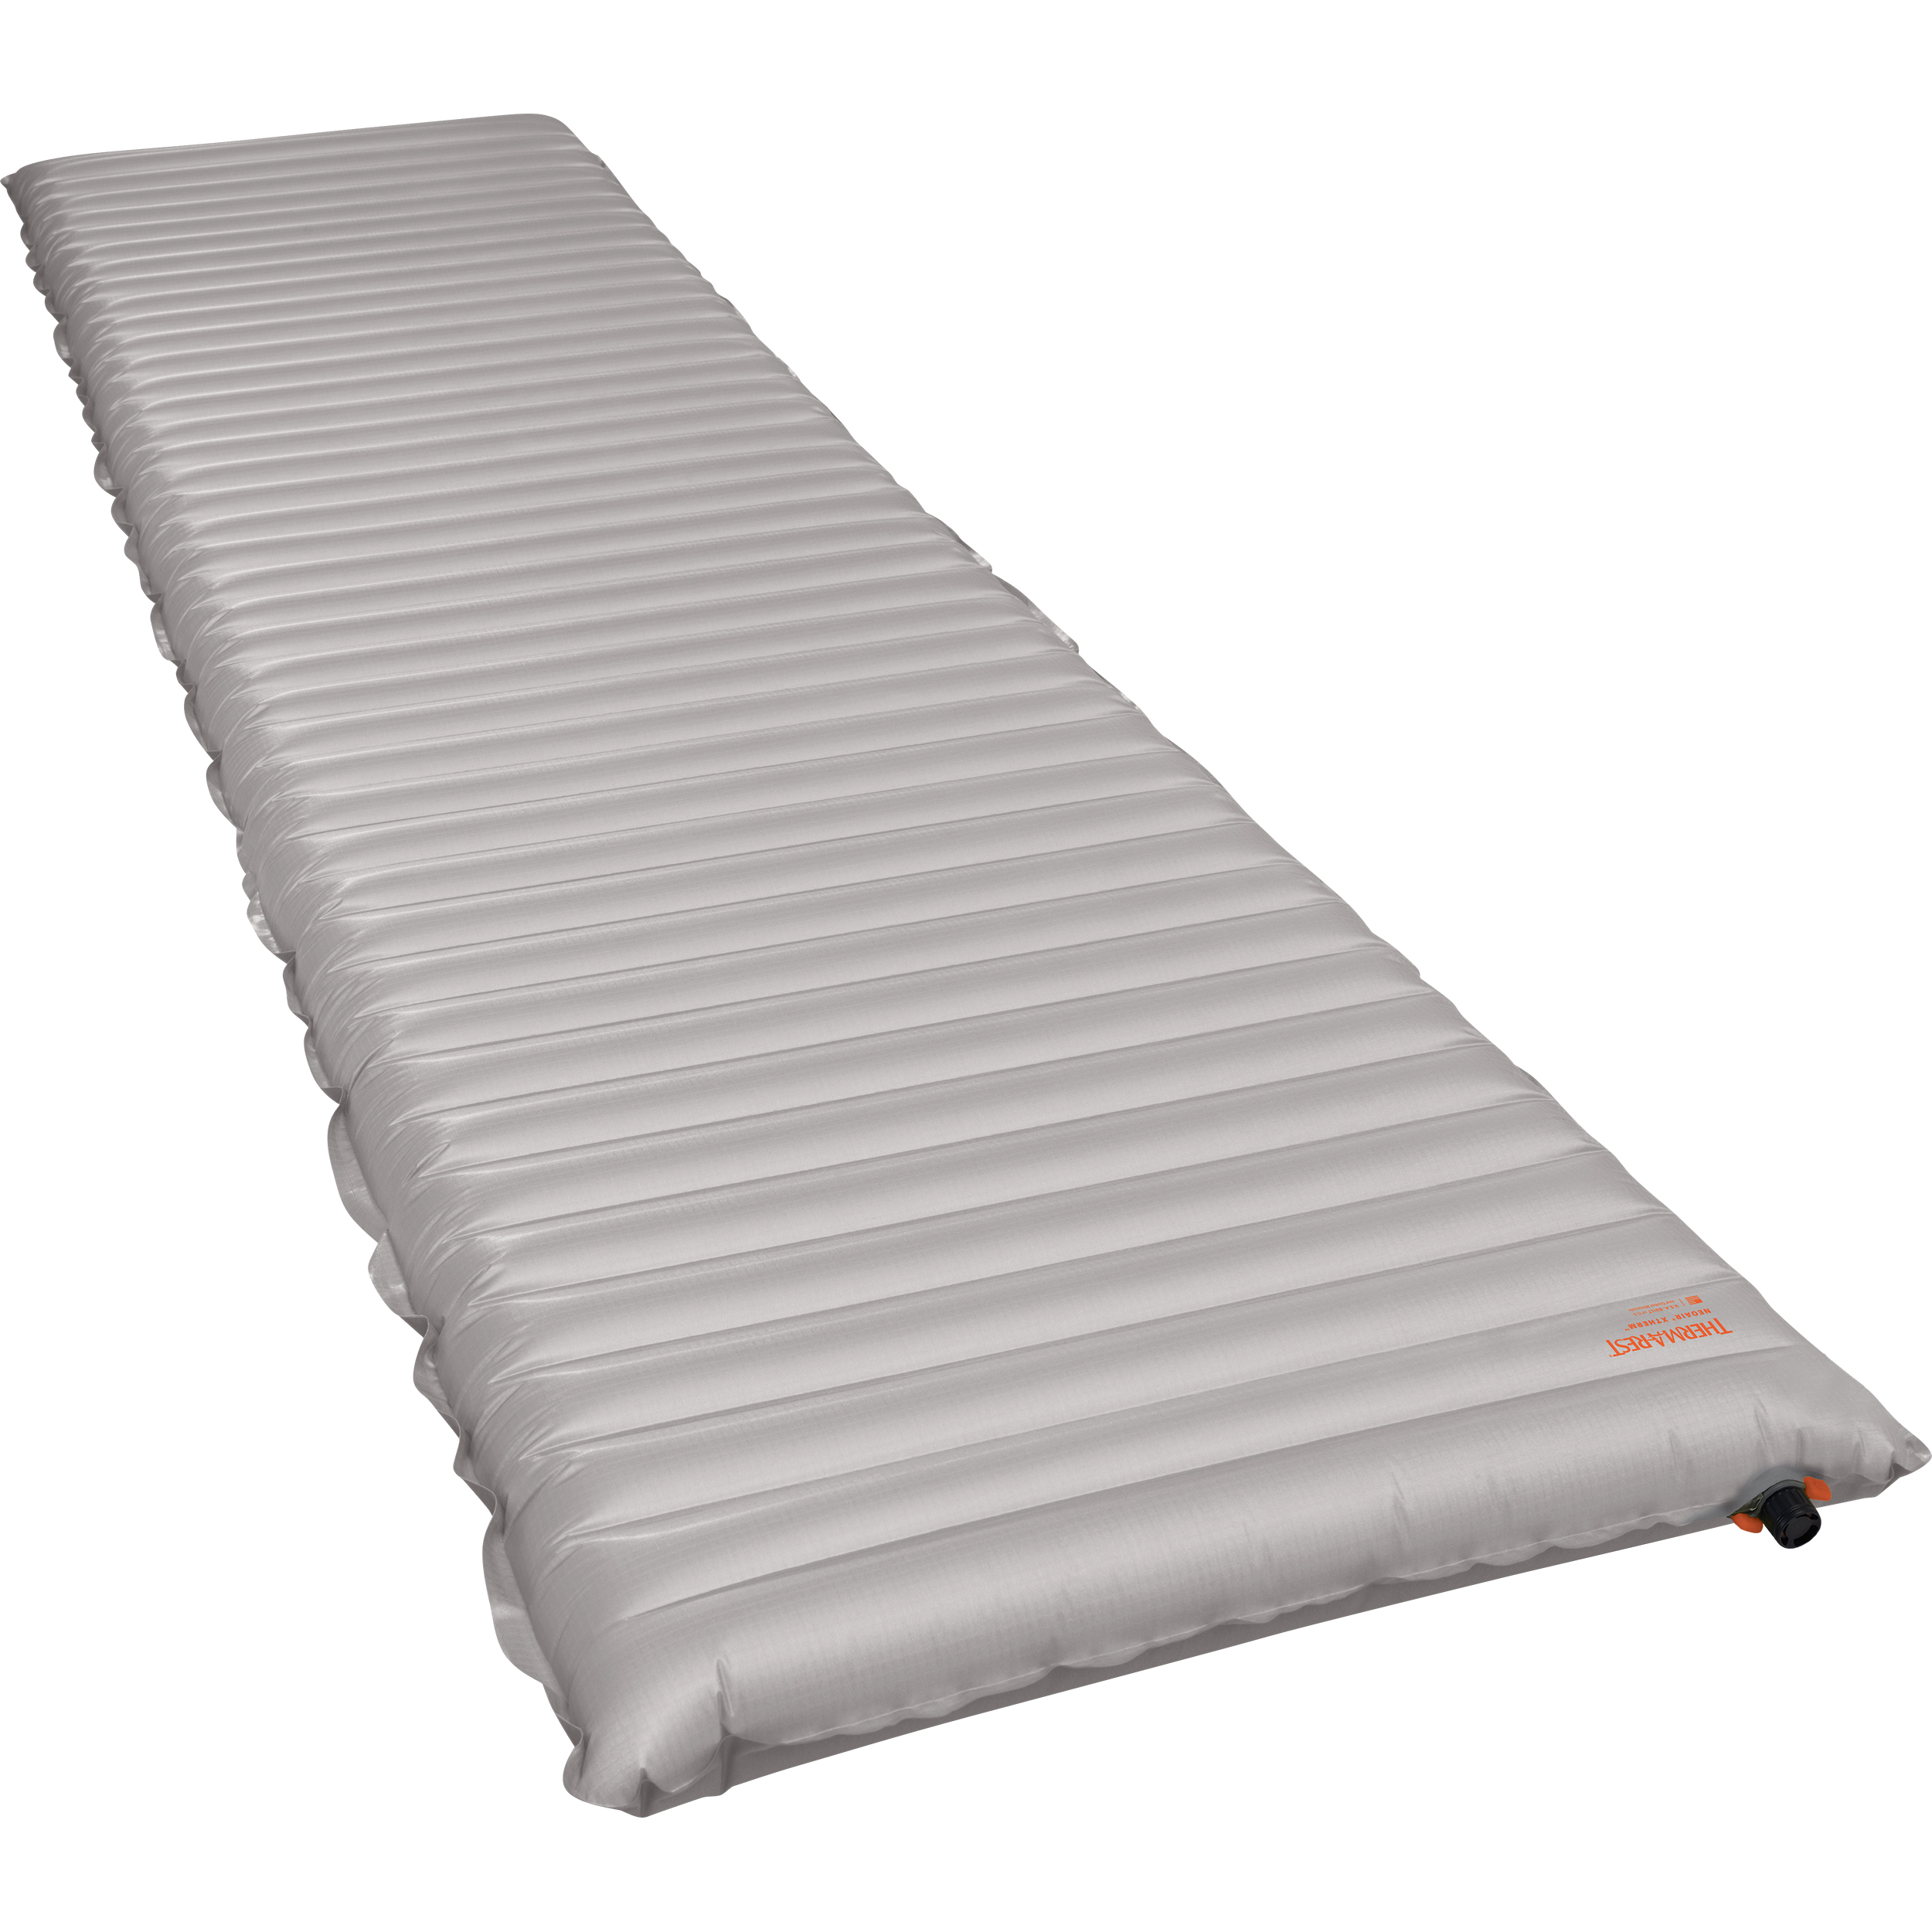 NeoAir® XTherm™ MAX | Matelas gonflable léger | Therm-a-Rest®